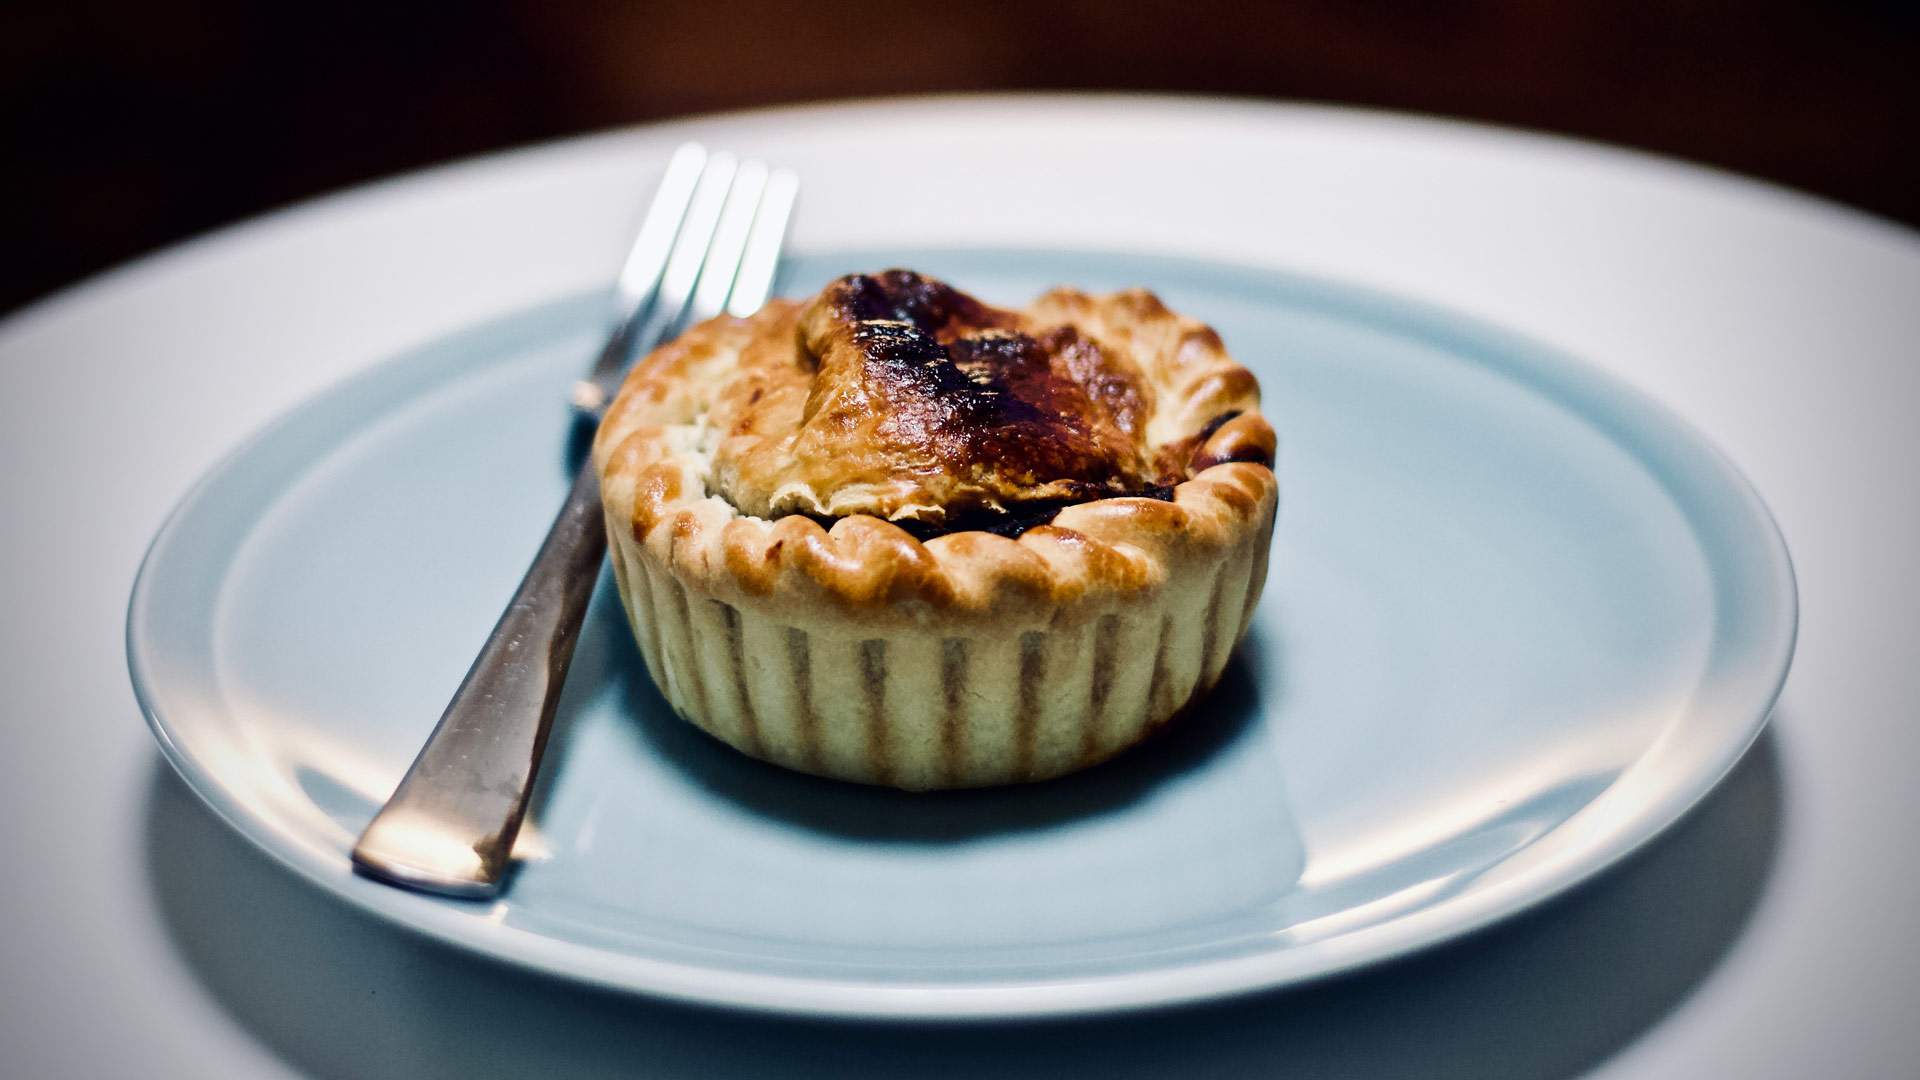 Sydney Is Now Home to Its First Pie Delivery Service